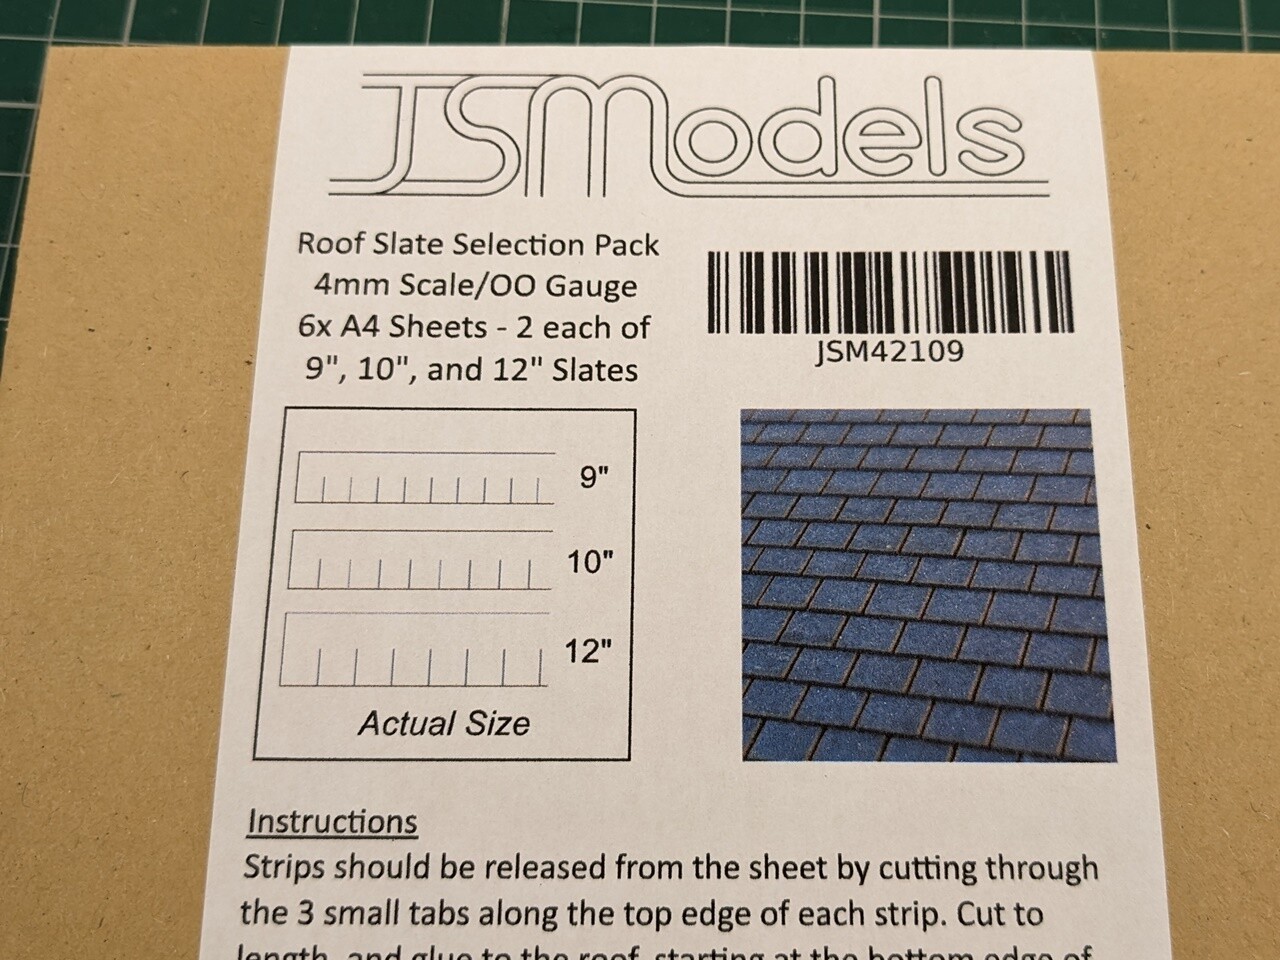 4mm Scale Roof Slate Selection Pack (6x A4 sheets)